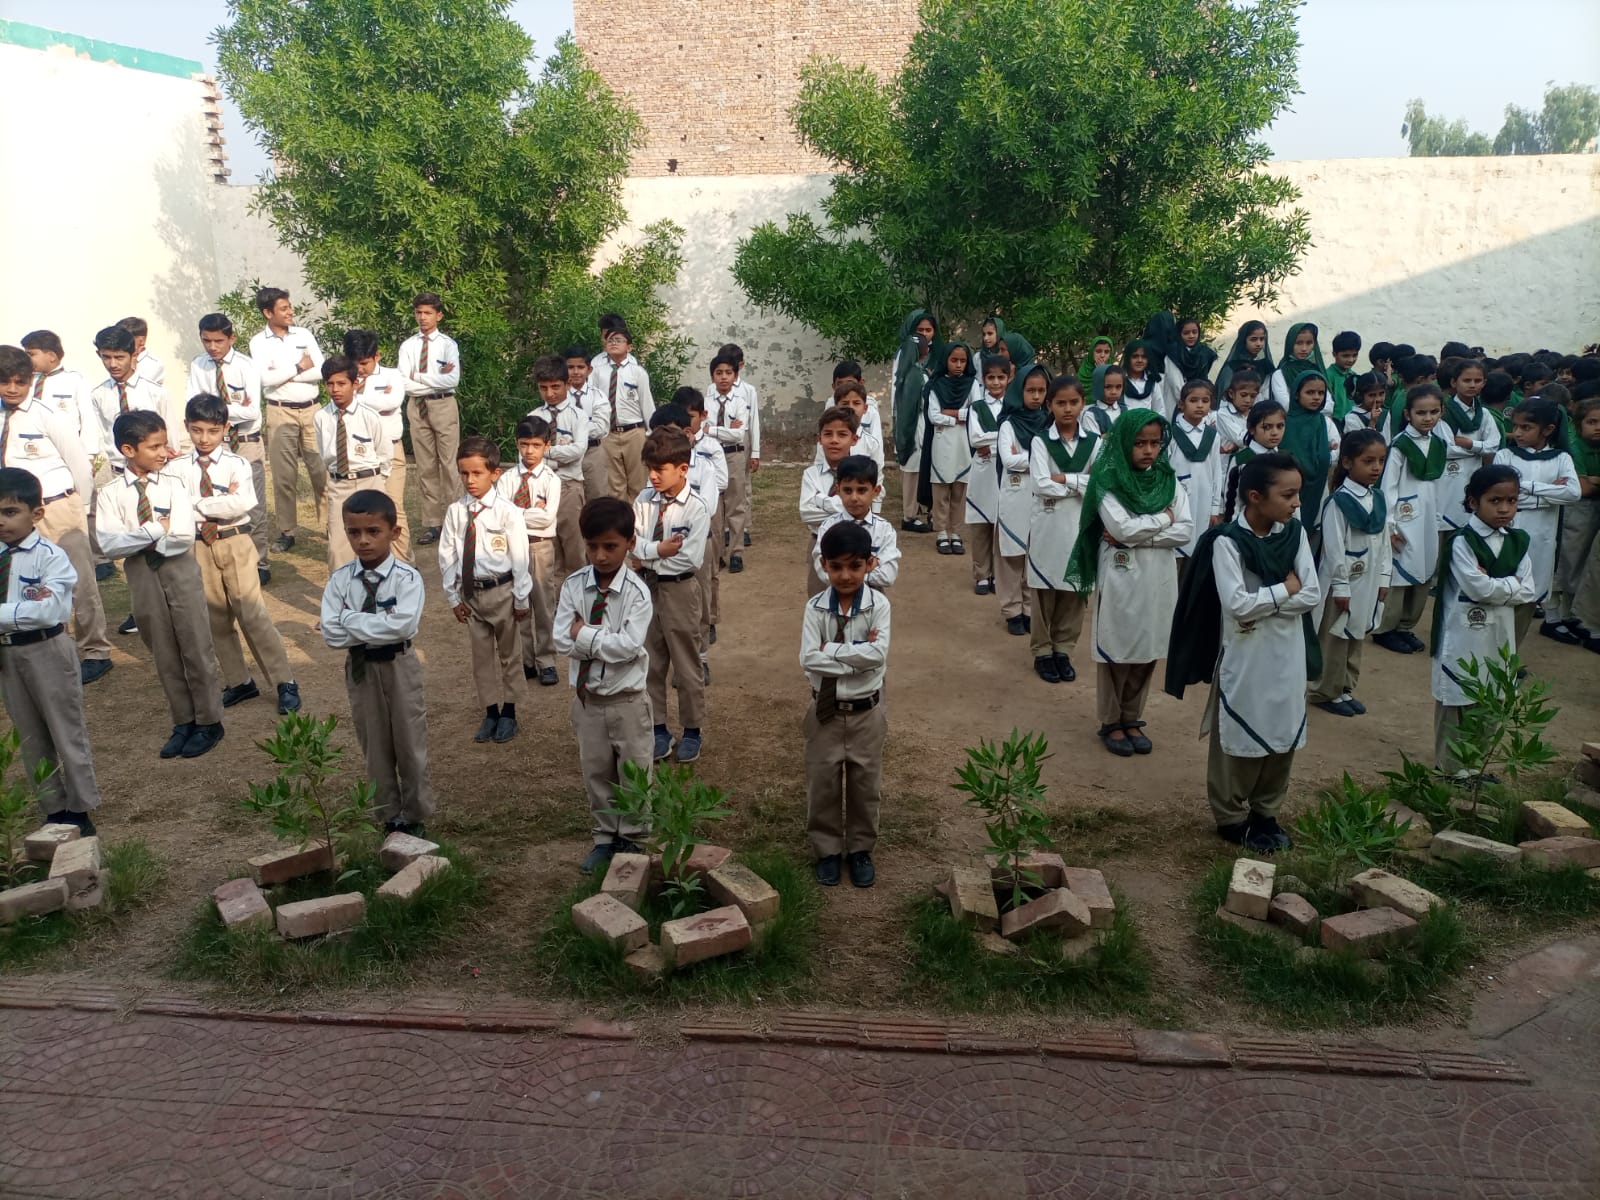 Alhamdulillah – Some random pictures from morning assemblies at Forces School Sir Rasheed Campus